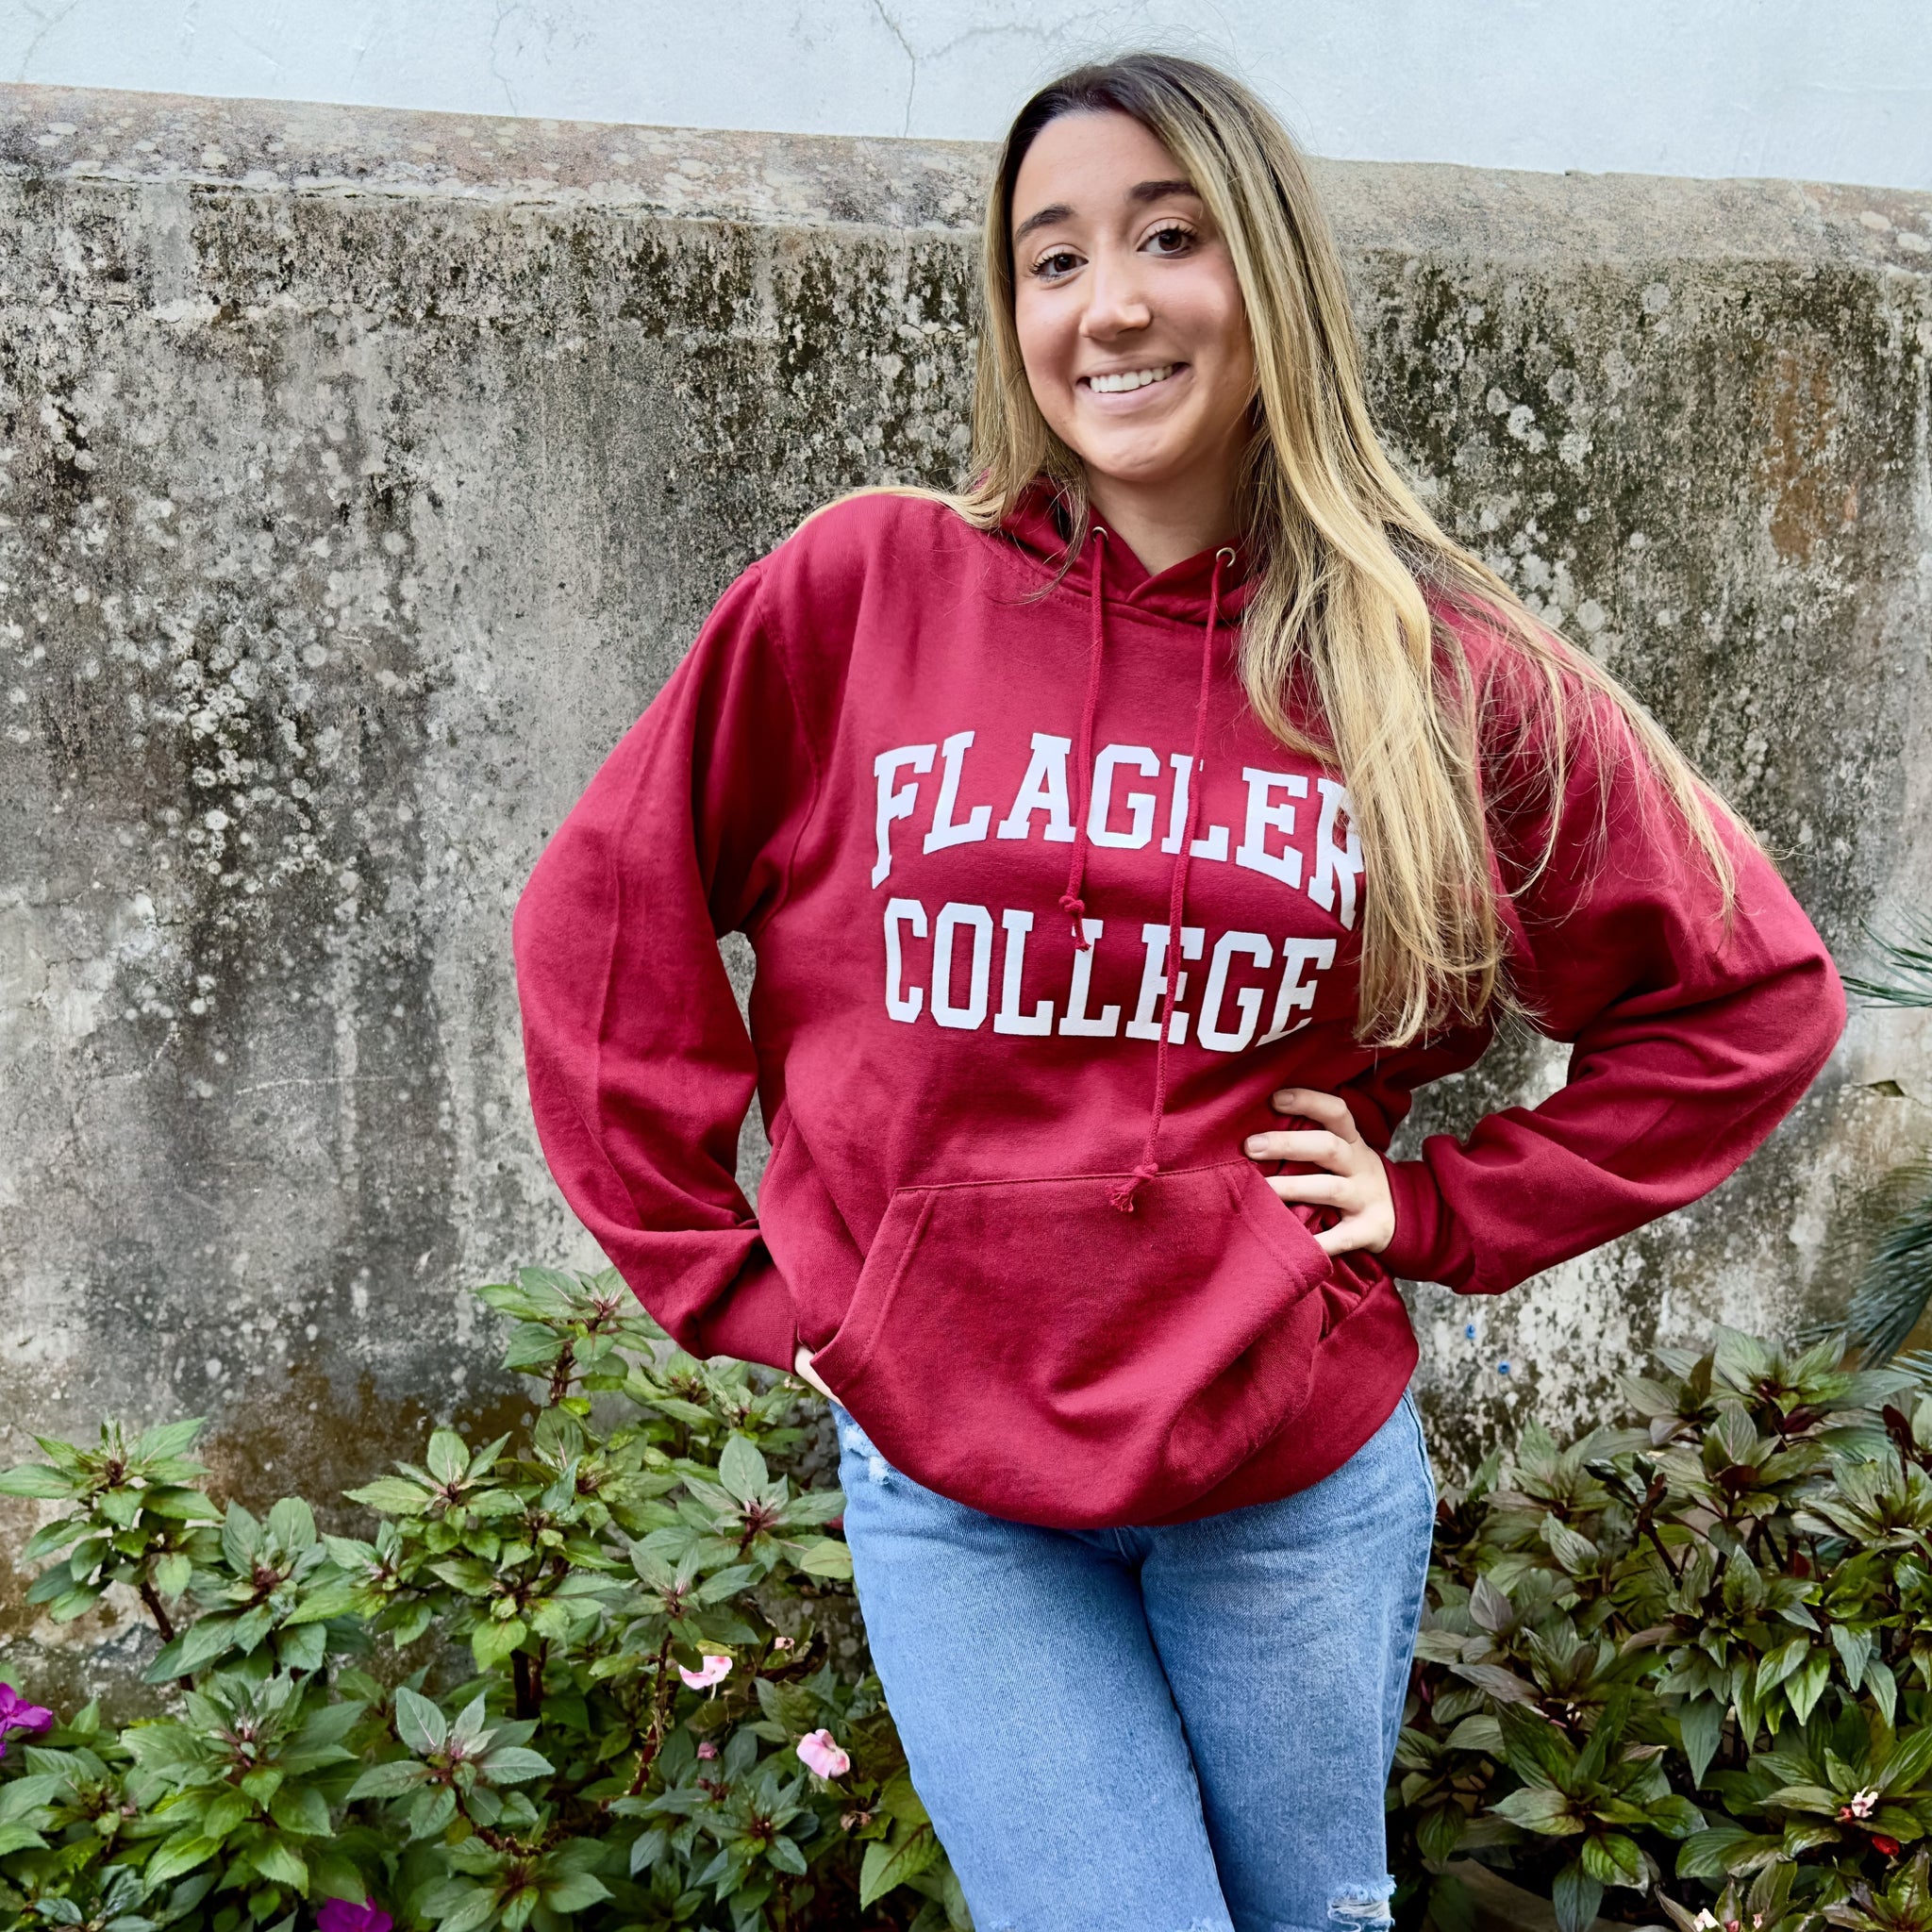 Woman wearing crimson solid hooded sweatshirt with white imprint saying Flagler over College